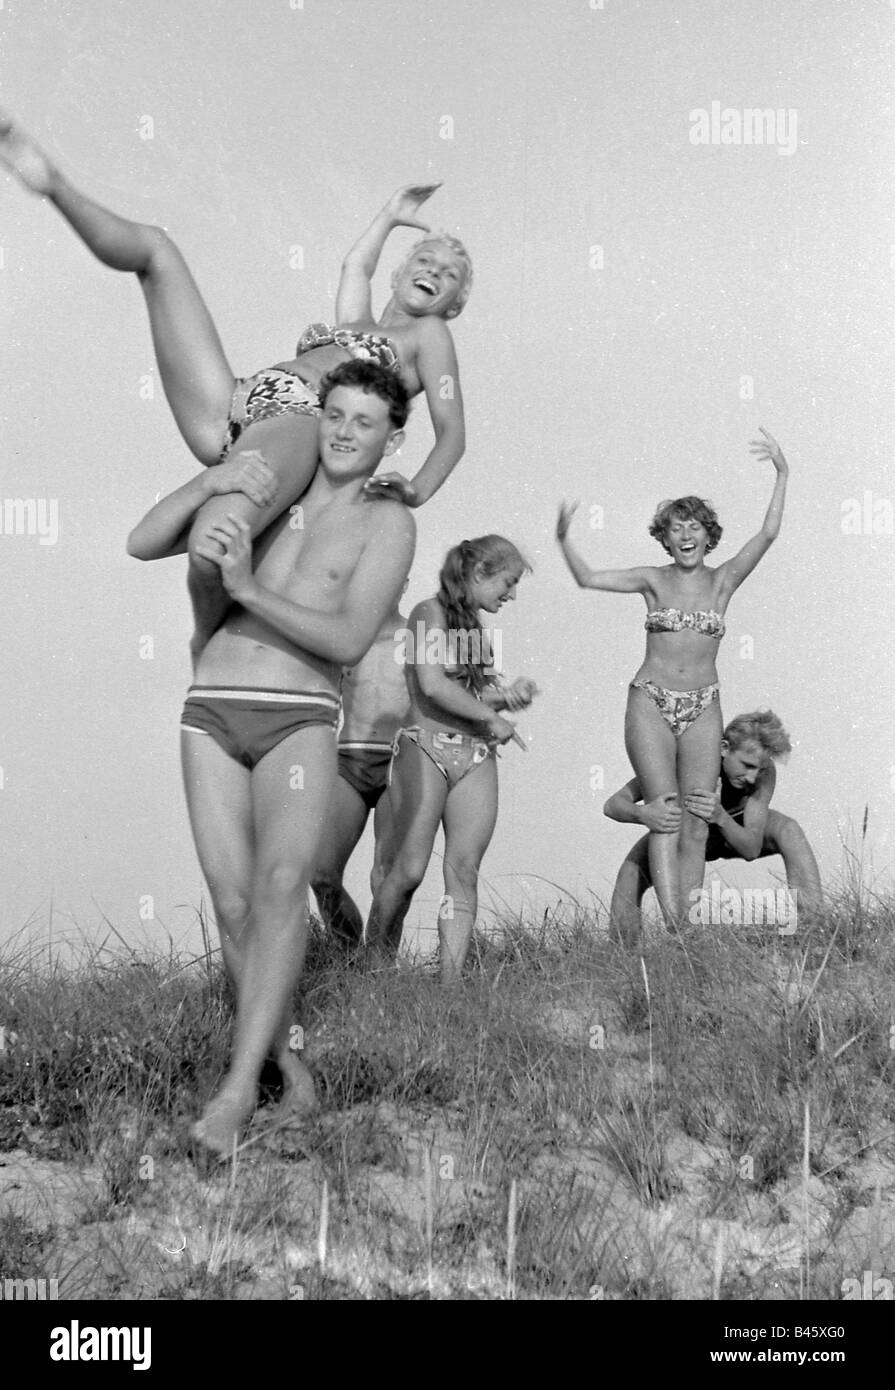 bathing, seaside ressort, Hiddensee, young people on the beach, 1957, Stock Photo